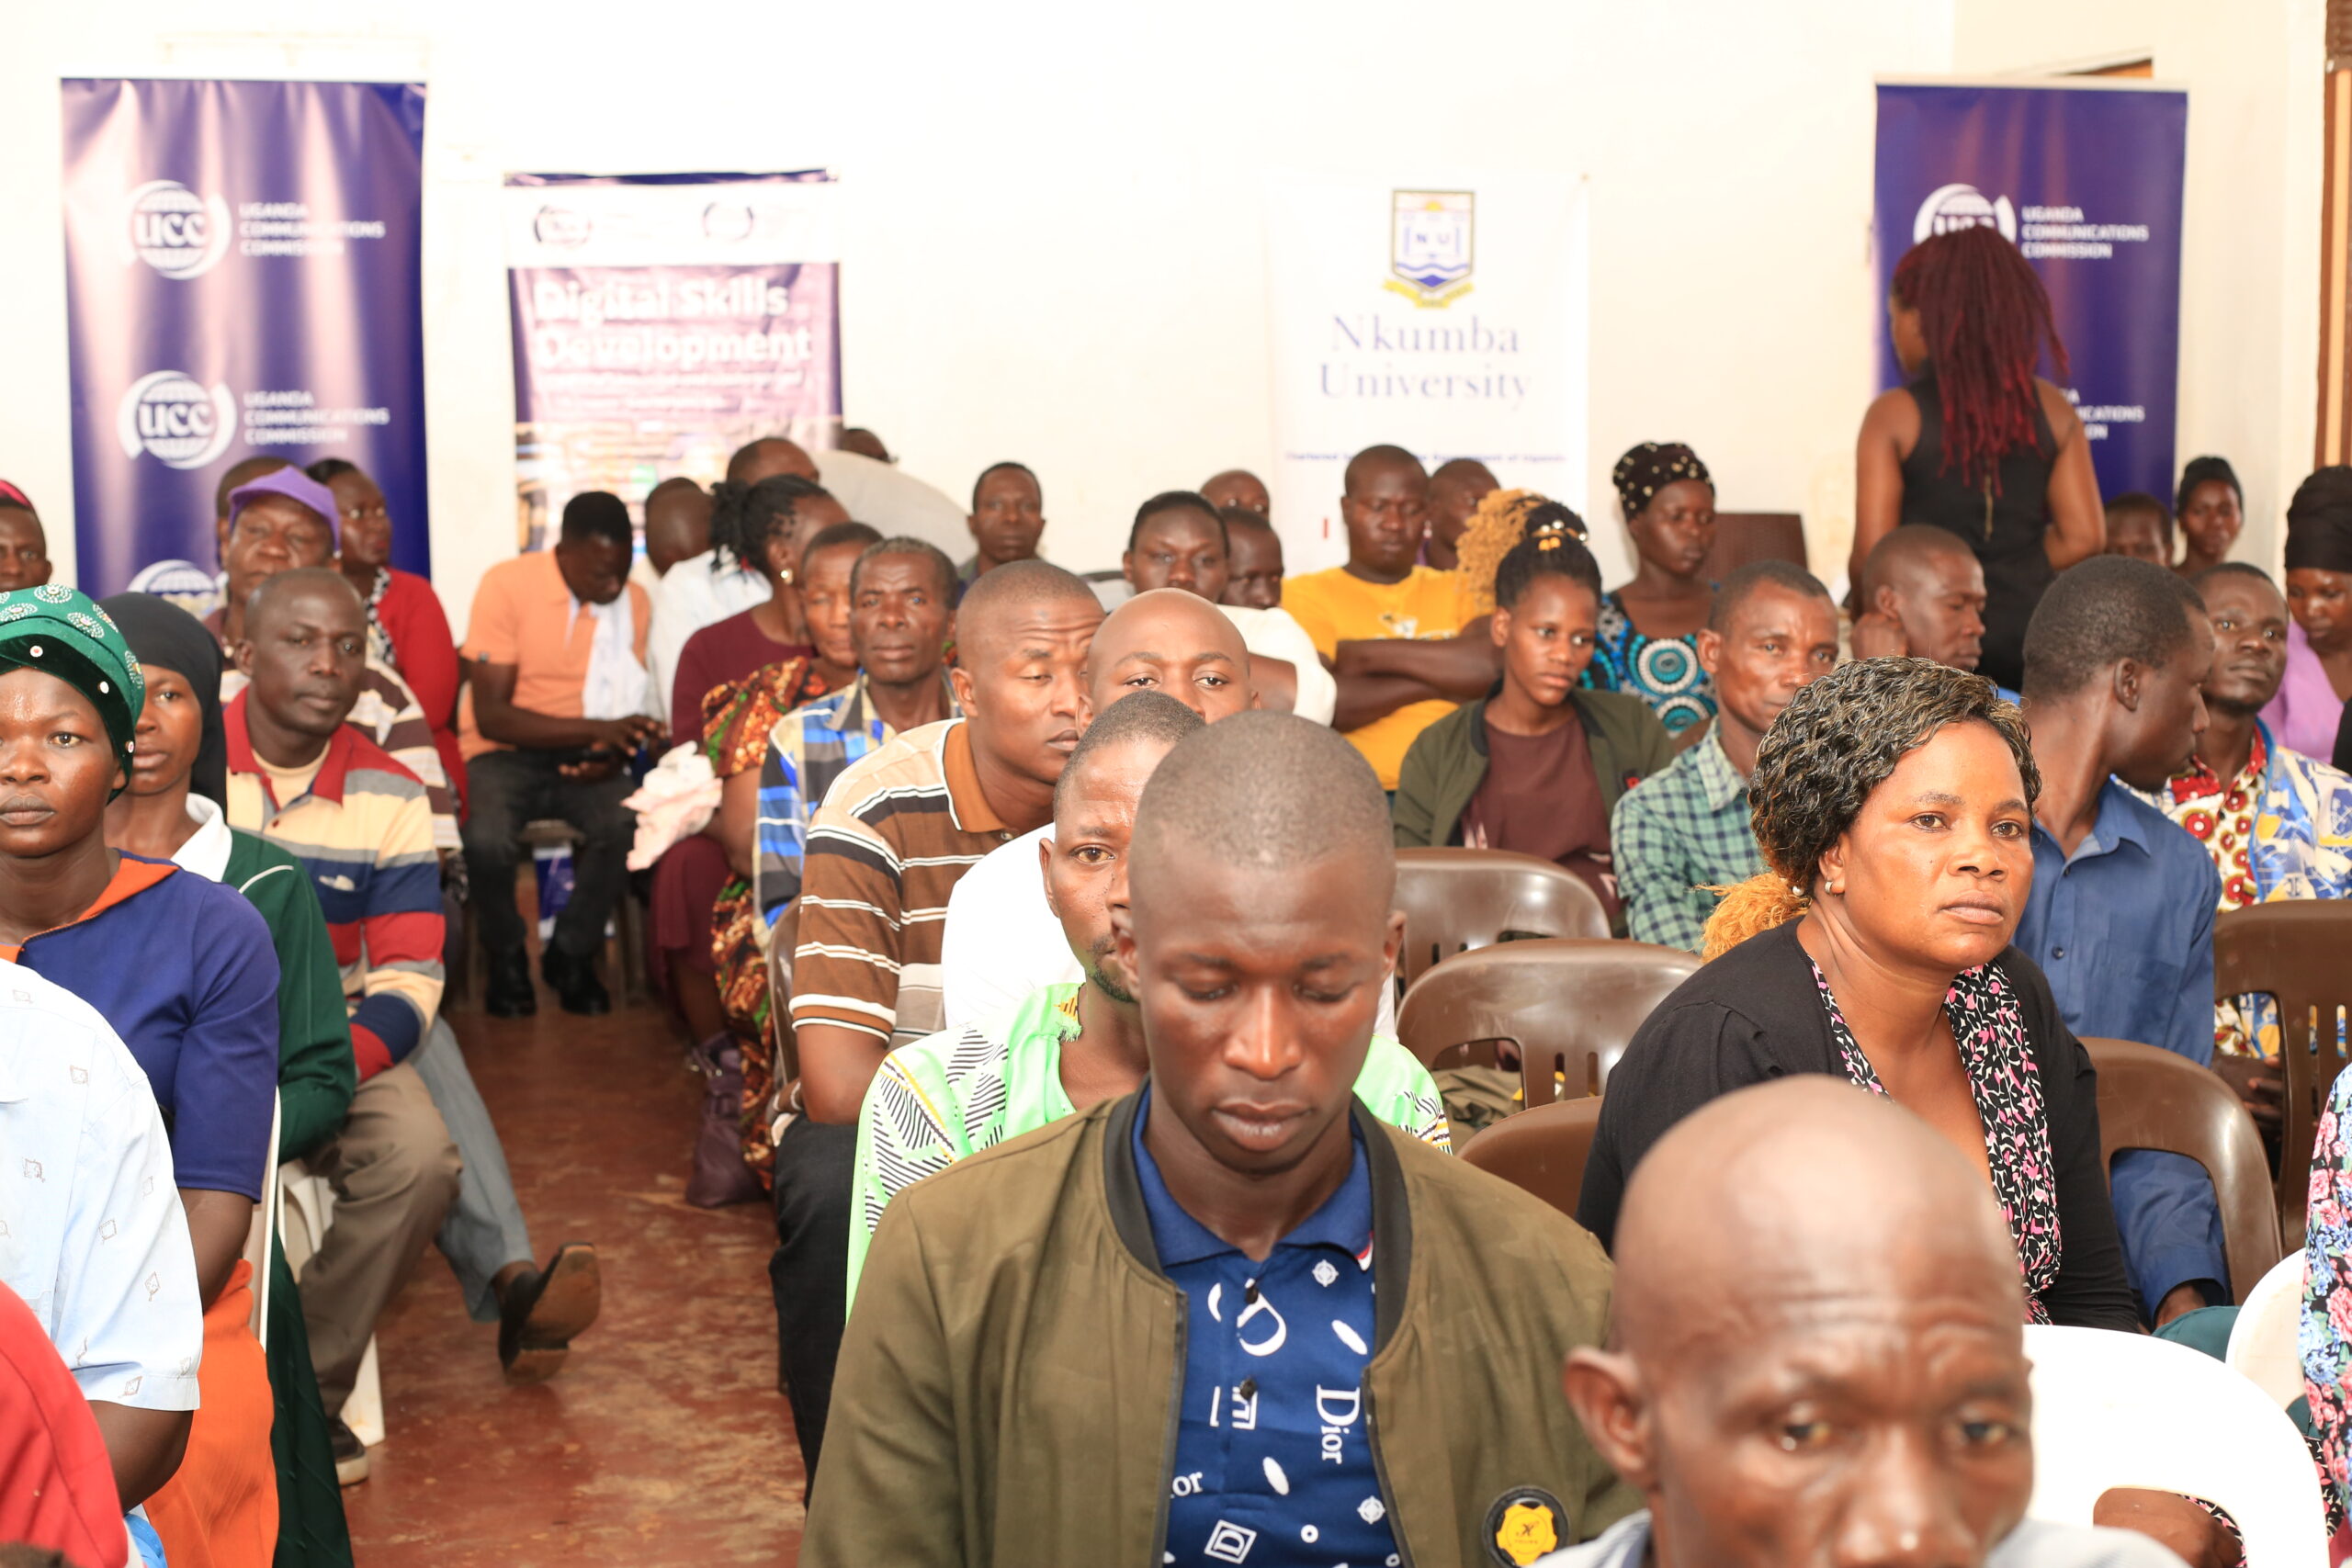 Residents of Kaliro during day 1 of the training